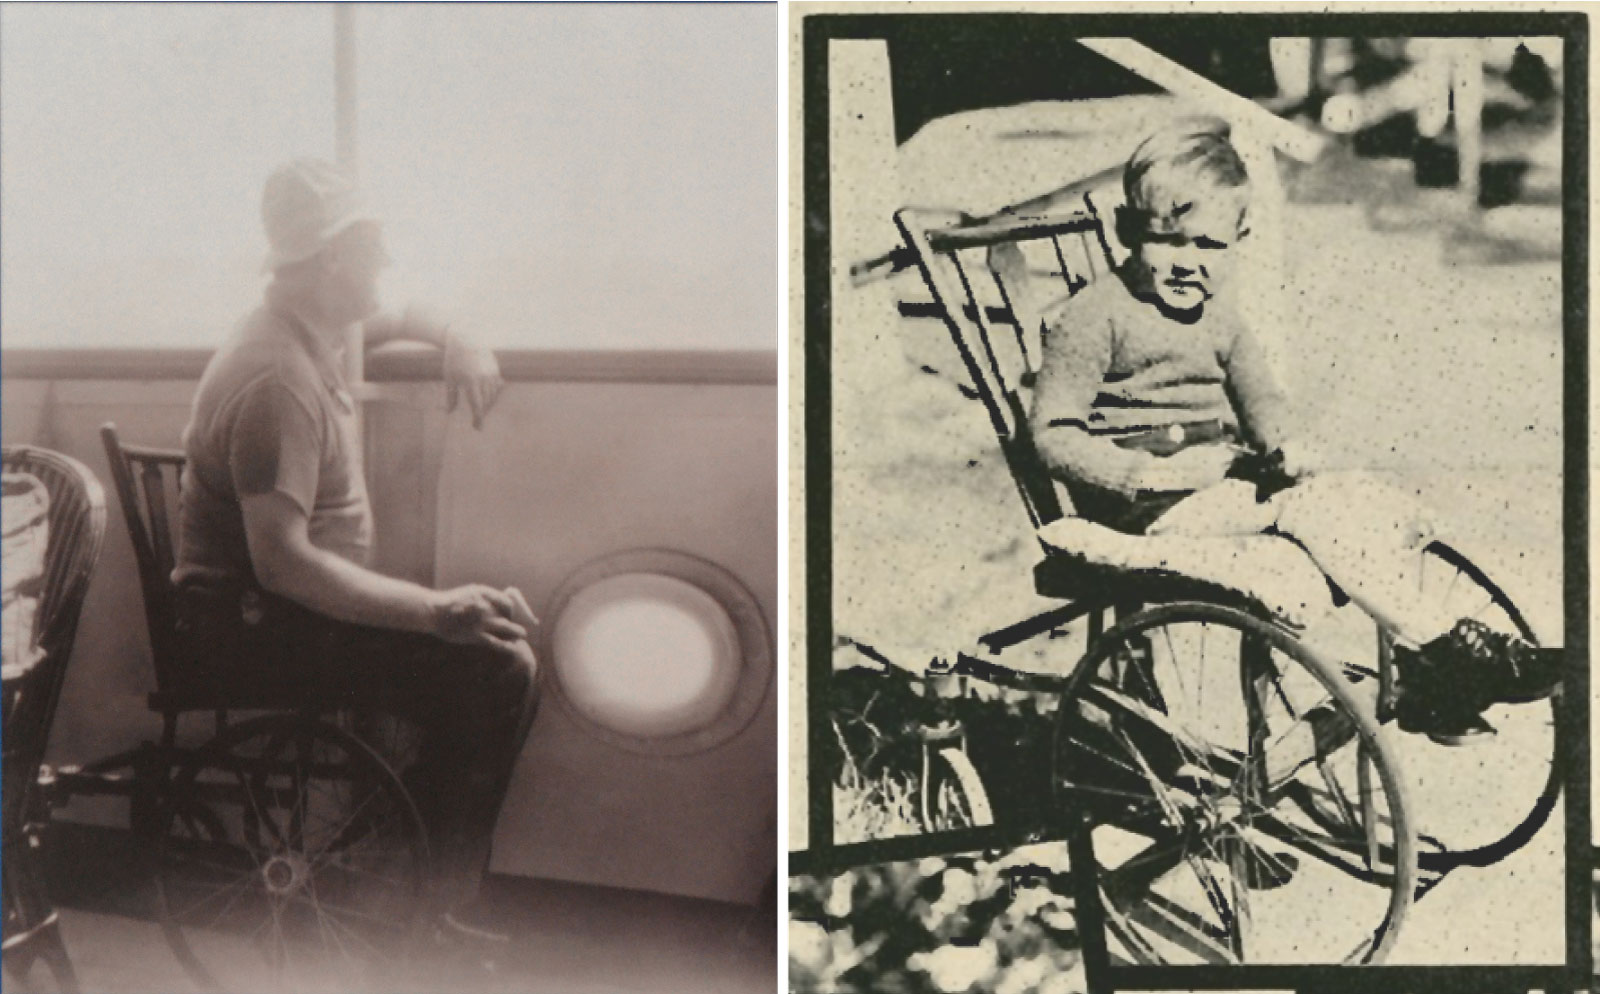 A comparison of two images showing FDR in a wheelchair and a boy in a similar wheelchair.